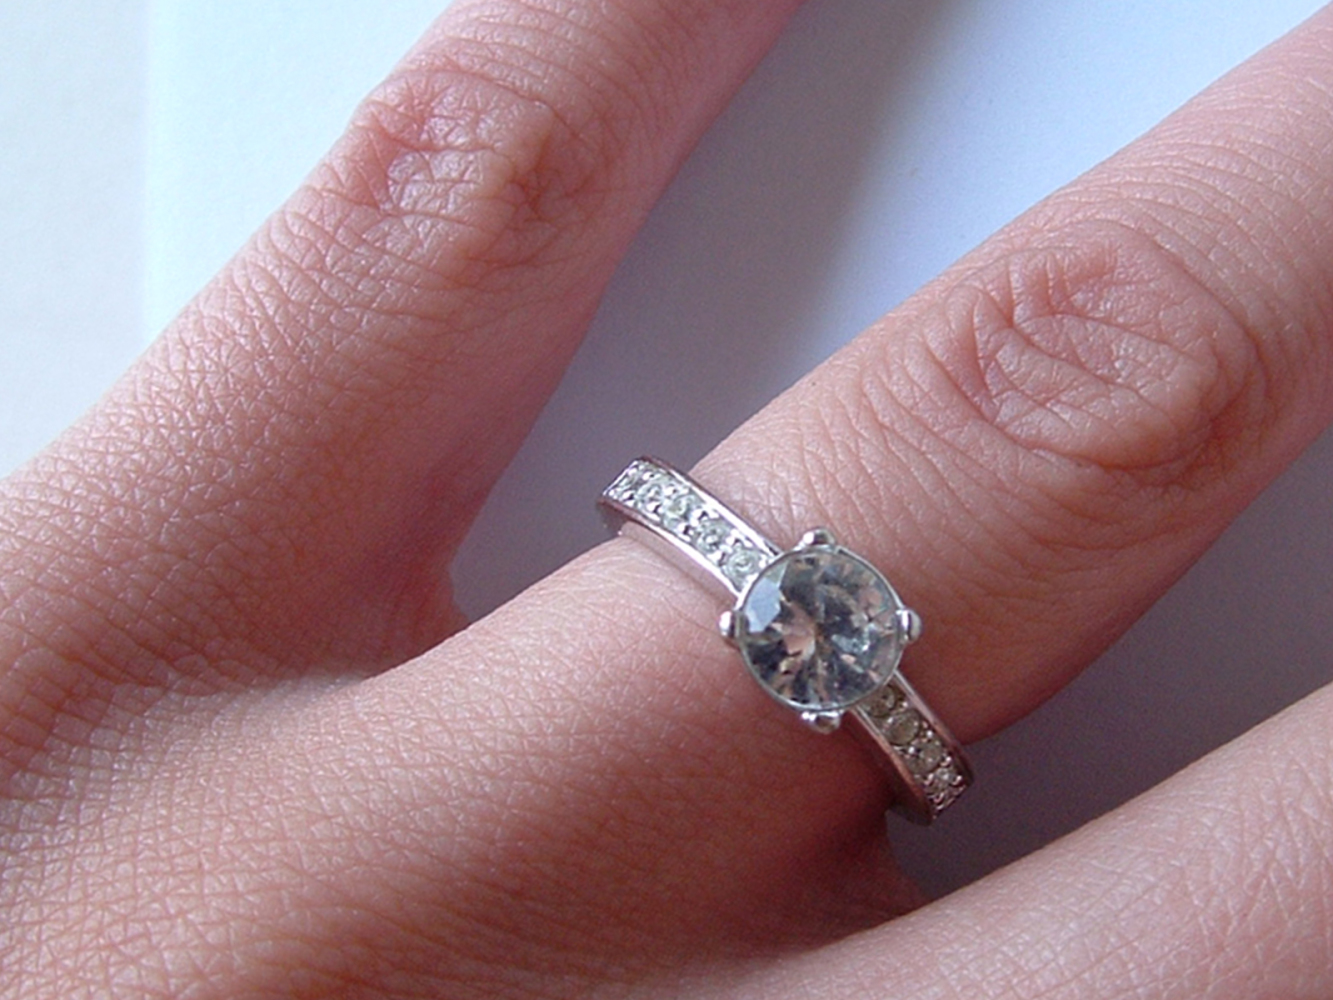 Photo of engagement ring